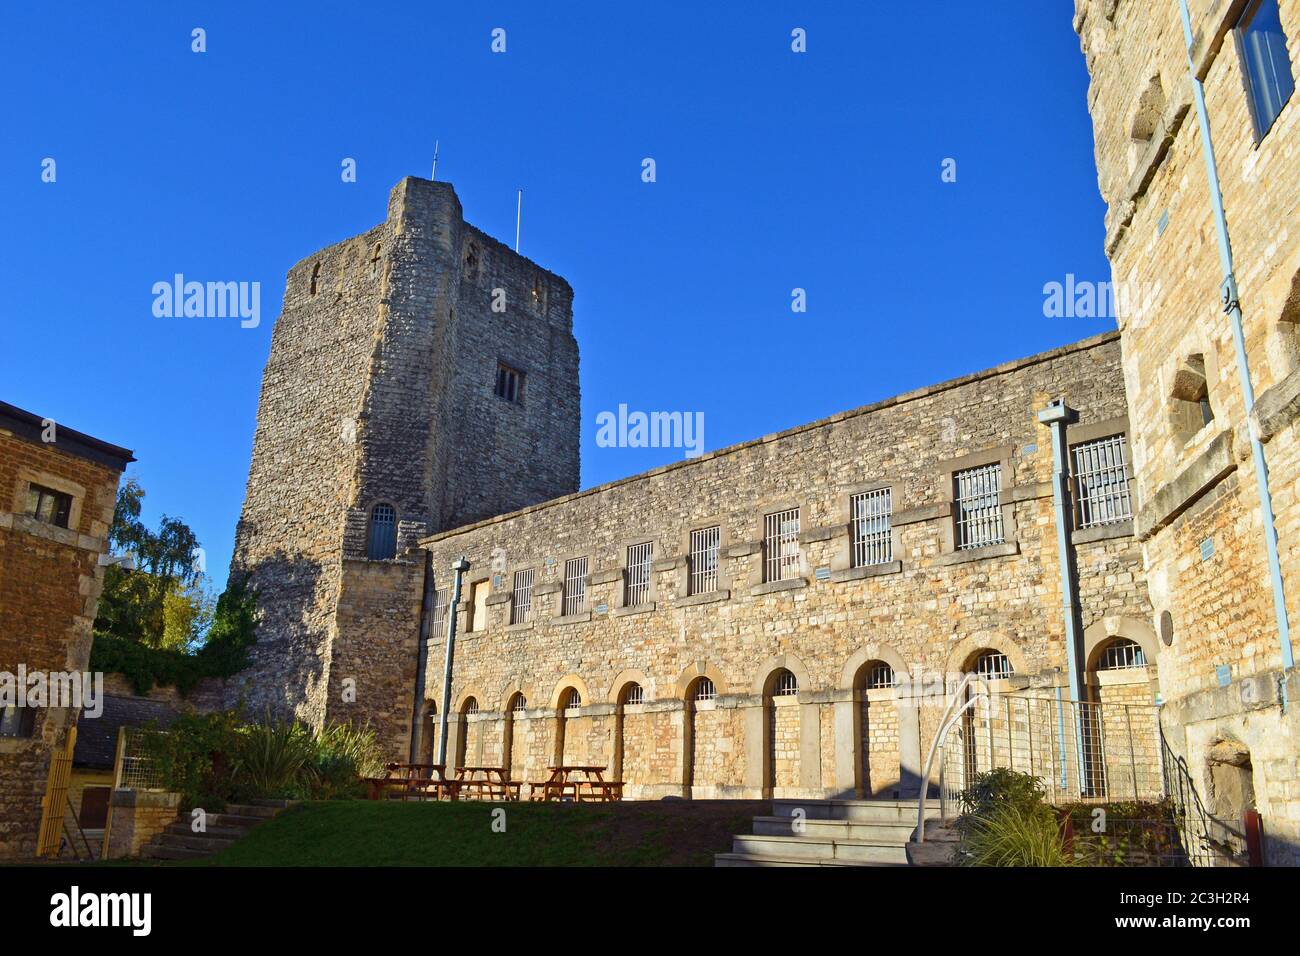 Oxford Prison, now a visitor attraction and heritage site in Oxford, UK Stock Photo